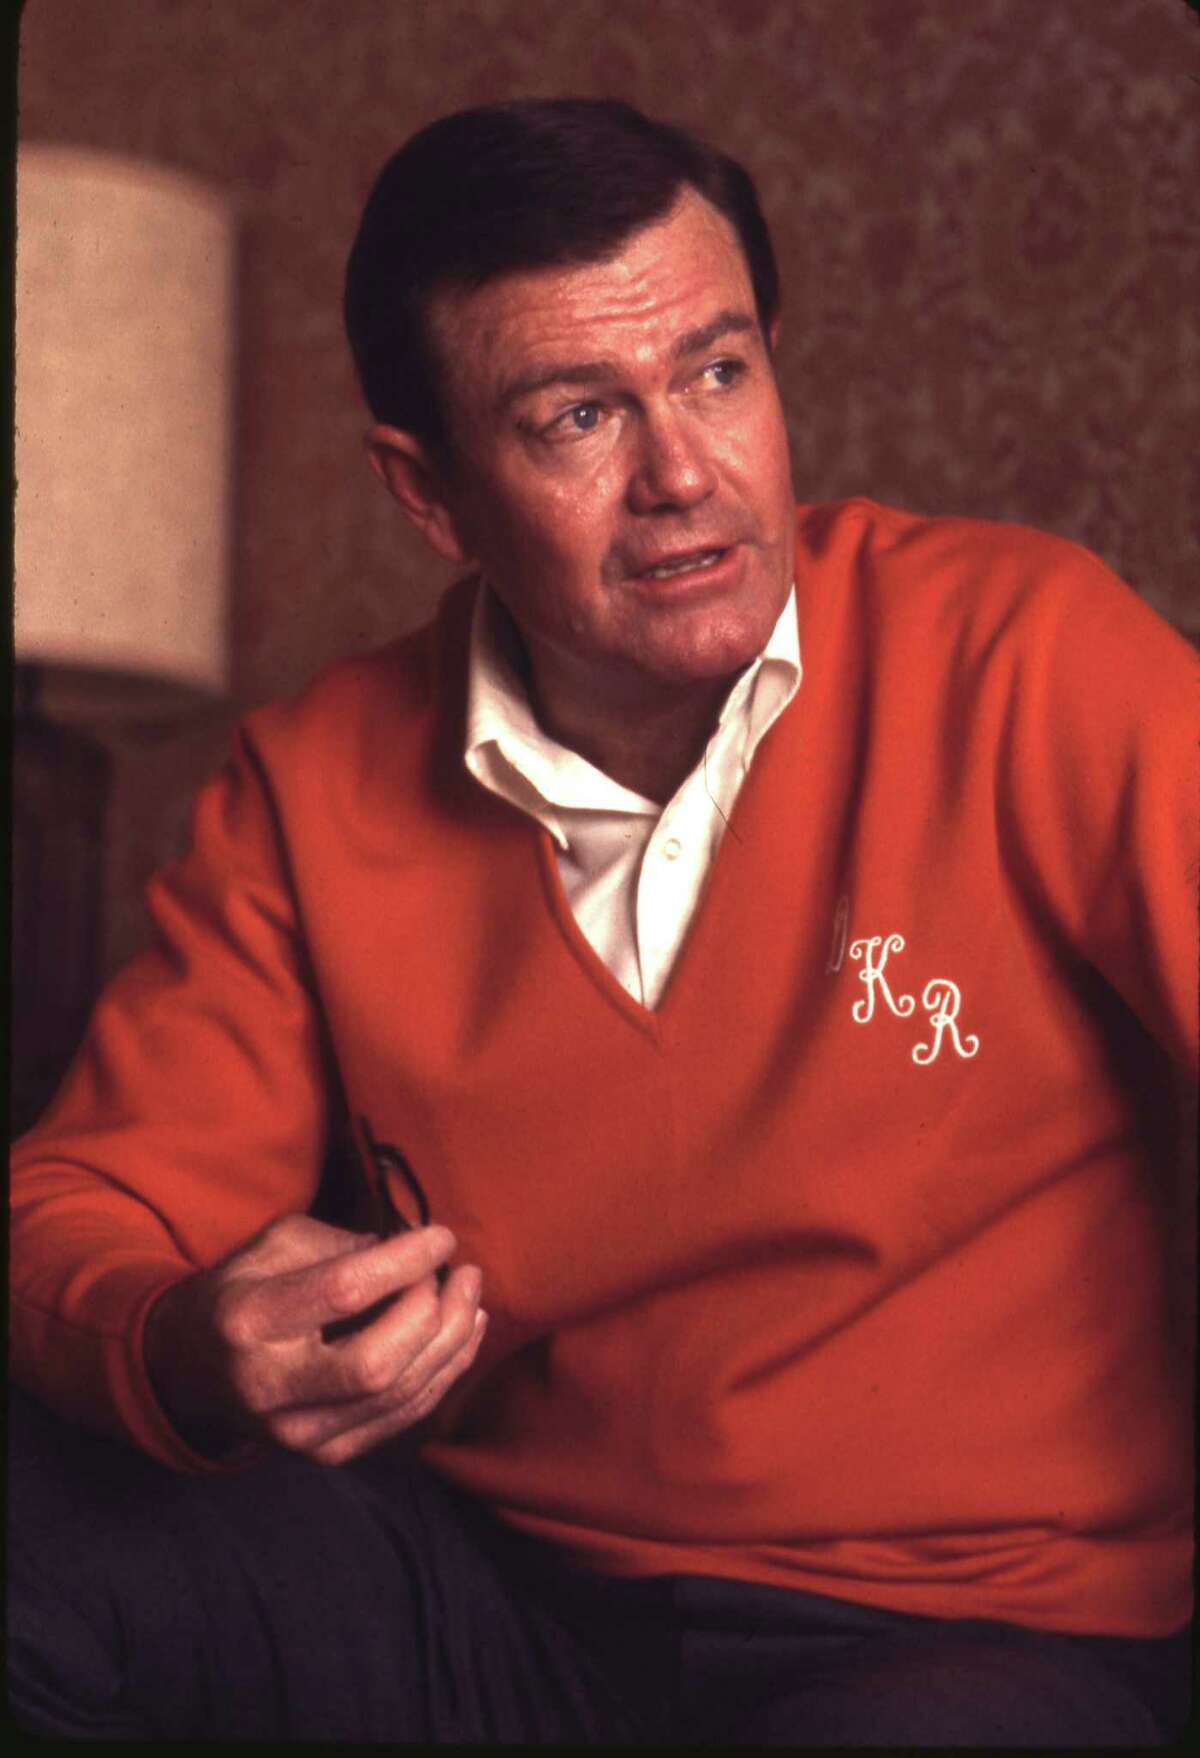 Darrell Royal, Texas Any discussion of Texas college football coaches begins with Royal, under whose stewardship the Longhorns were a powerhouse. He inherited a team that went 1-9 the year before he arrived and in two years, they were ranked in the top five. Royal never had a losing season in Austin in 20 years from 1957 to 1976, winning 11 Southwest Conference titles to go with three national championships (1963, 1969, 1970). The Longhorns' stadium bears his name, and for good reason.